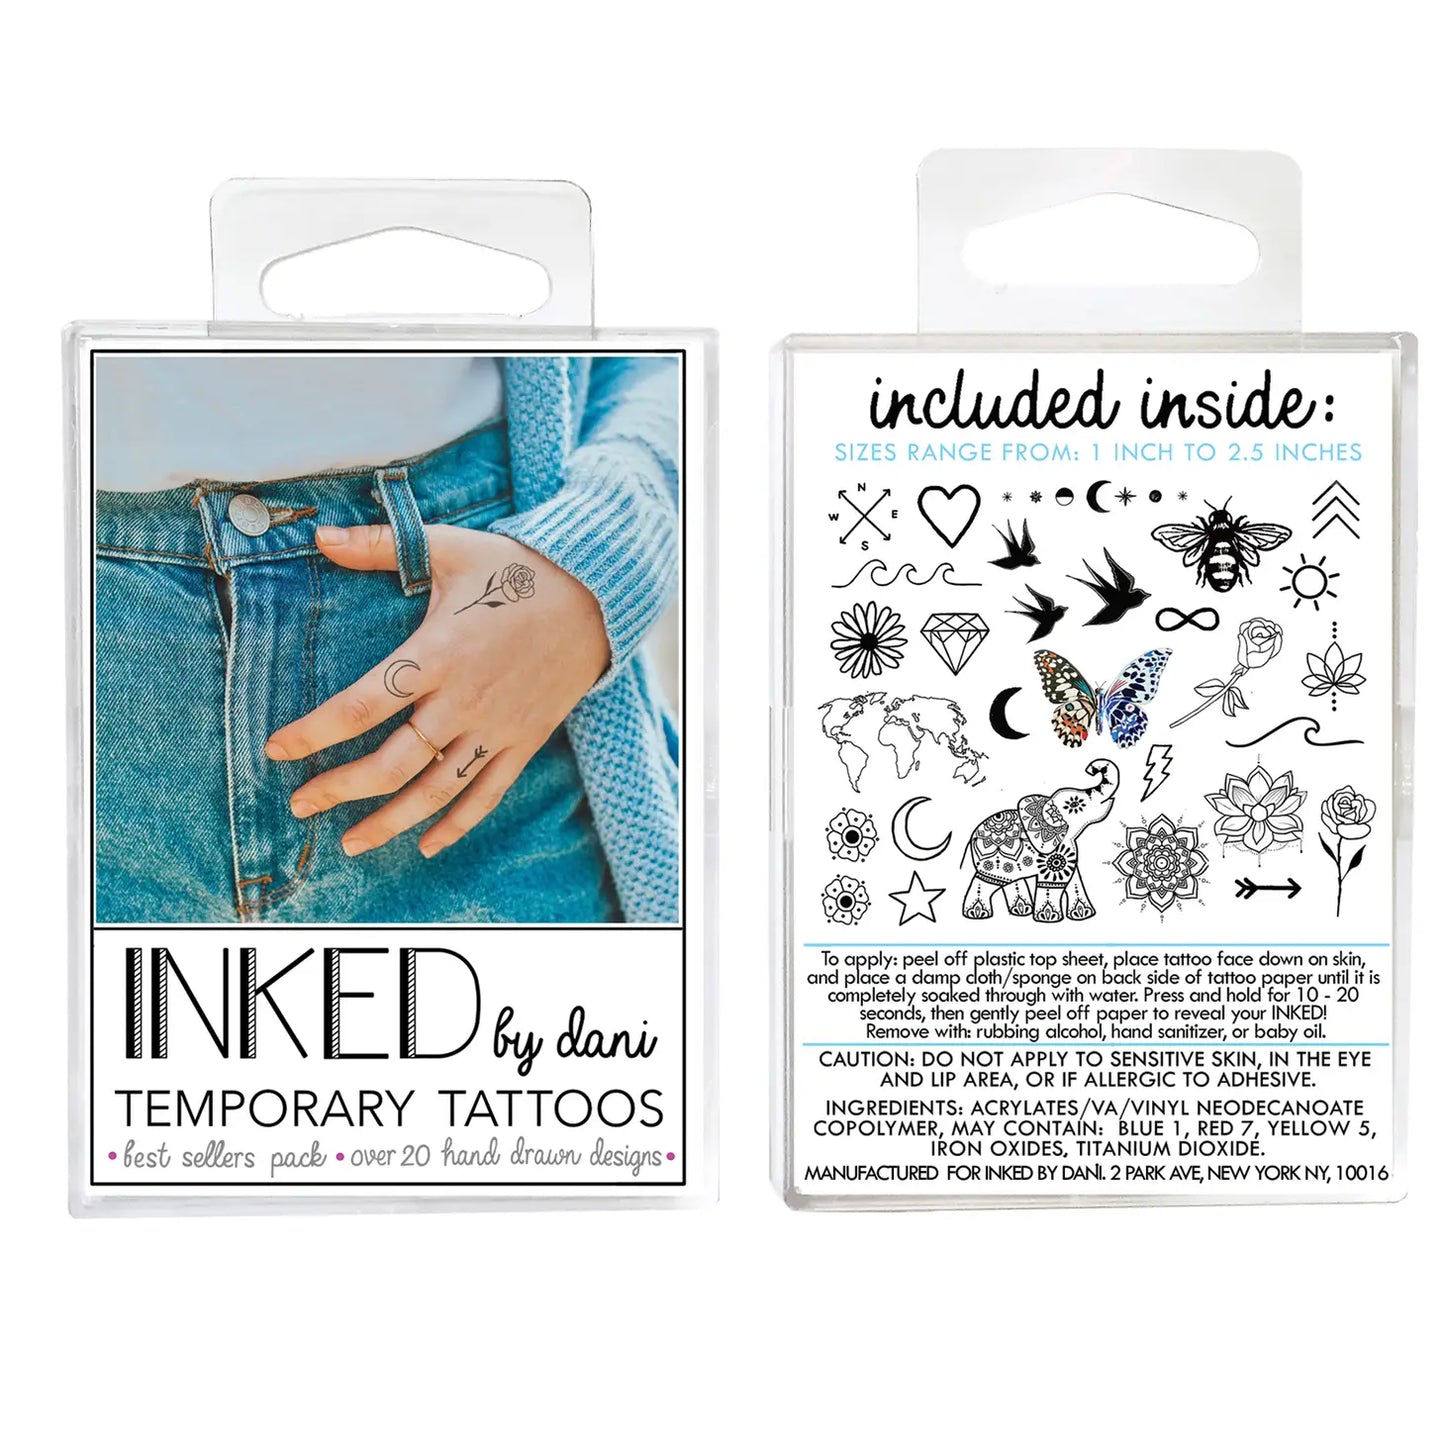 Best Sellers Temporary Tattoo Pack - INKED by Dani